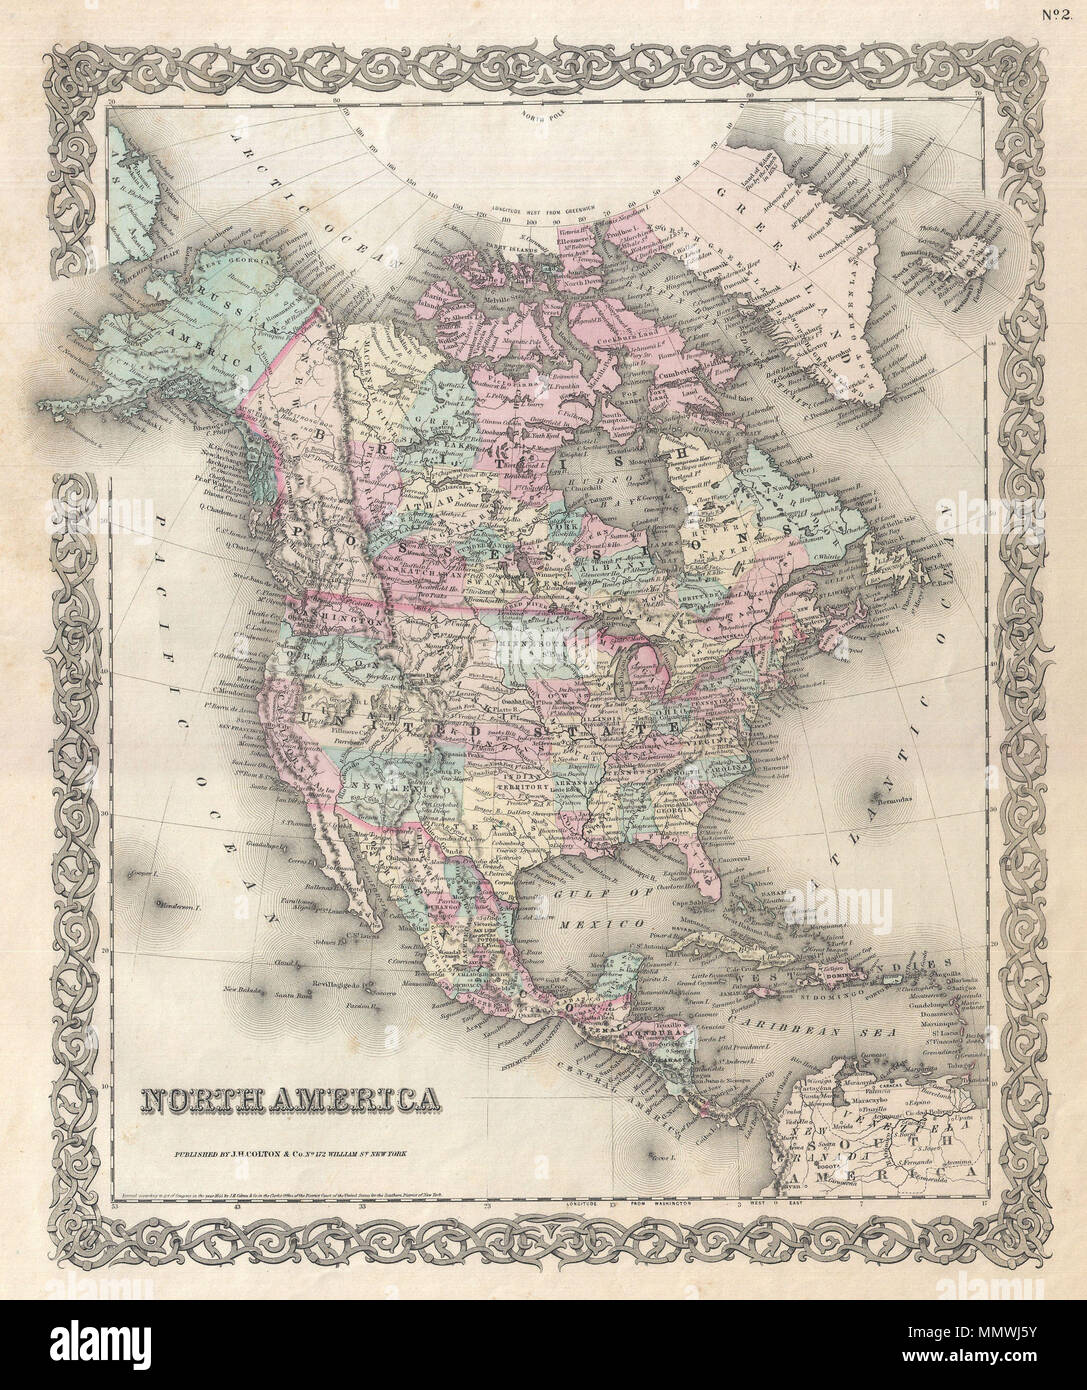 .  English: An excellent first edition example of Colton's rare map of North America. Covers the continent from South America to the Arctic, inclusive of the United States, Canada, Mexico, Central America and the West Indies. The United States portion of this map contains a early territorial configuration of the Transmississippi. Nebraska is shown at its fullest, extending from Kansas to the Canadian border. Montana, Wyoming, Idaho, Arizona, Colorado, West Virginia, and Nevada do not yet appear on the map. Notes Russian claims to Alaska. Identifies Pikes Peak, Fremont's Peak, Mt. Rainier, Mt.  Stock Photo